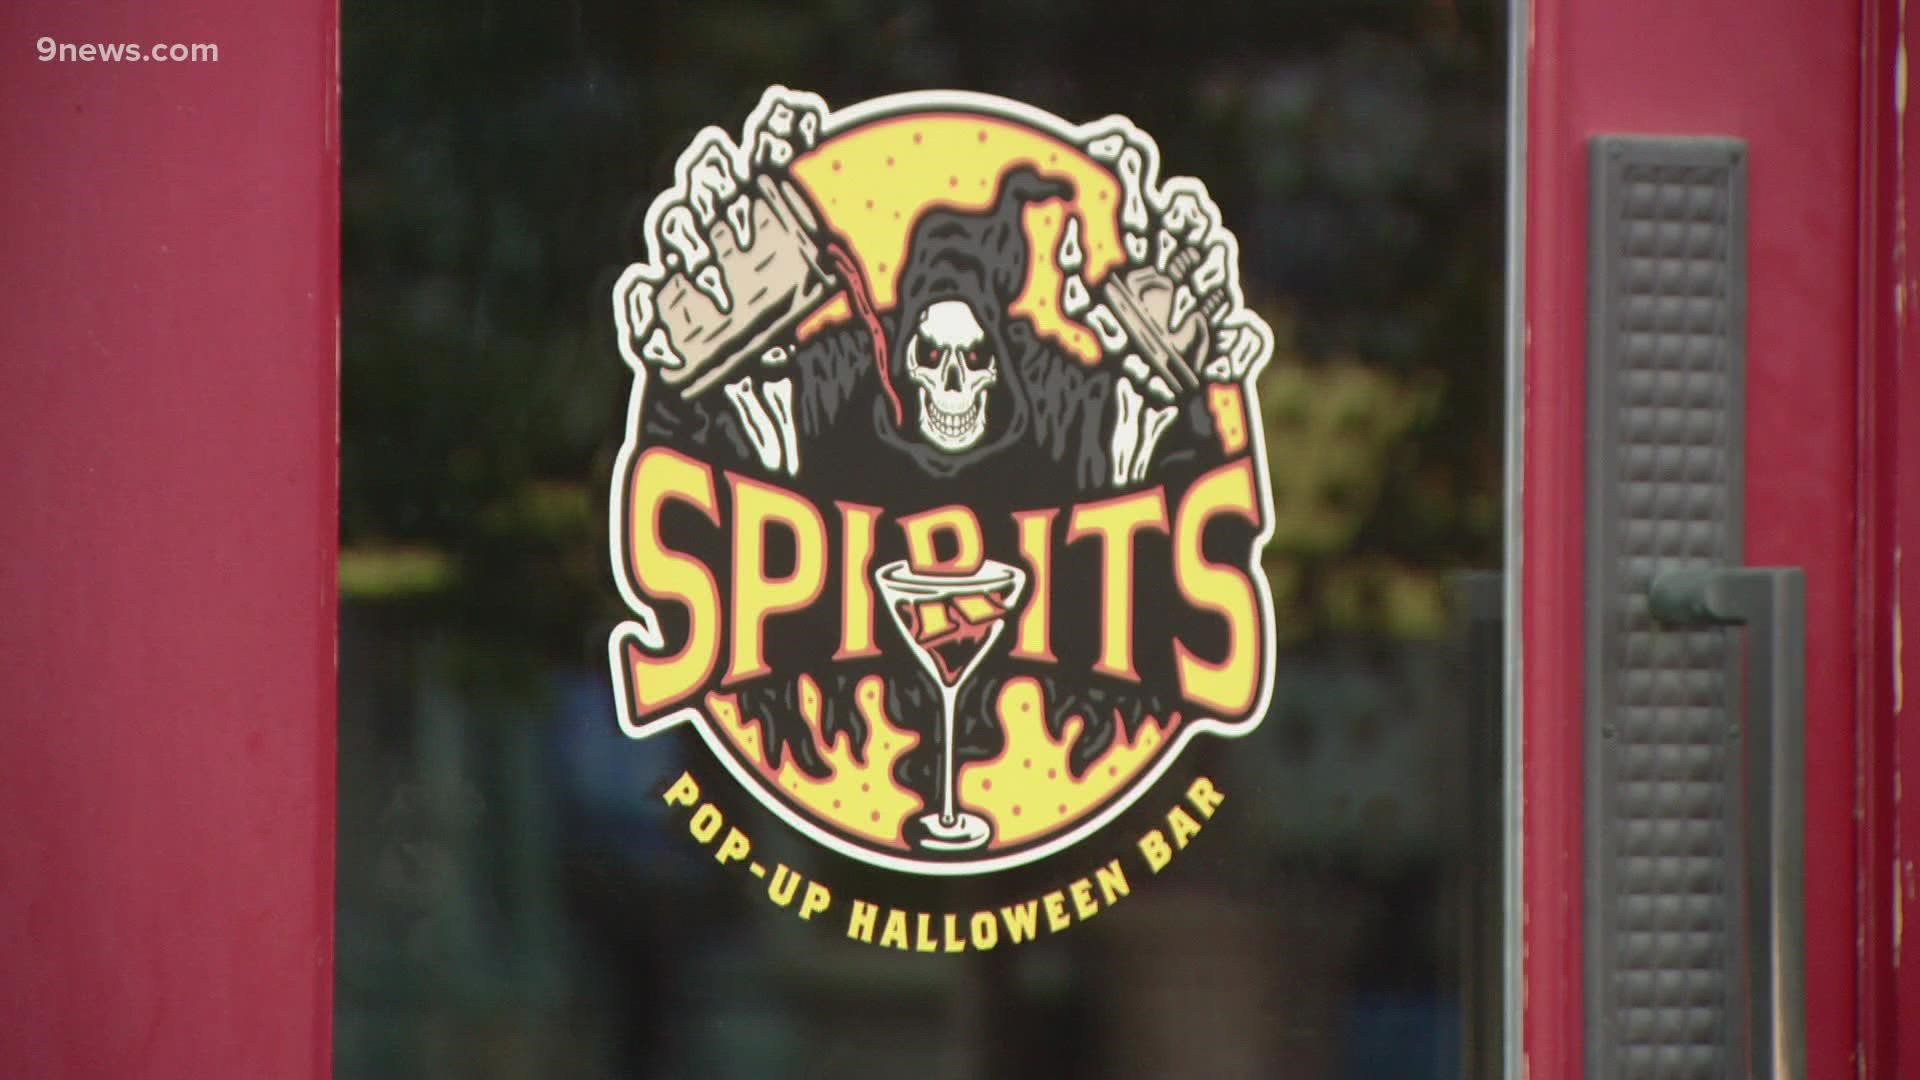 Get an inside look at Spirits, a Halloween pop-up bar in Larimer Square. The bar is only open until the end of October.